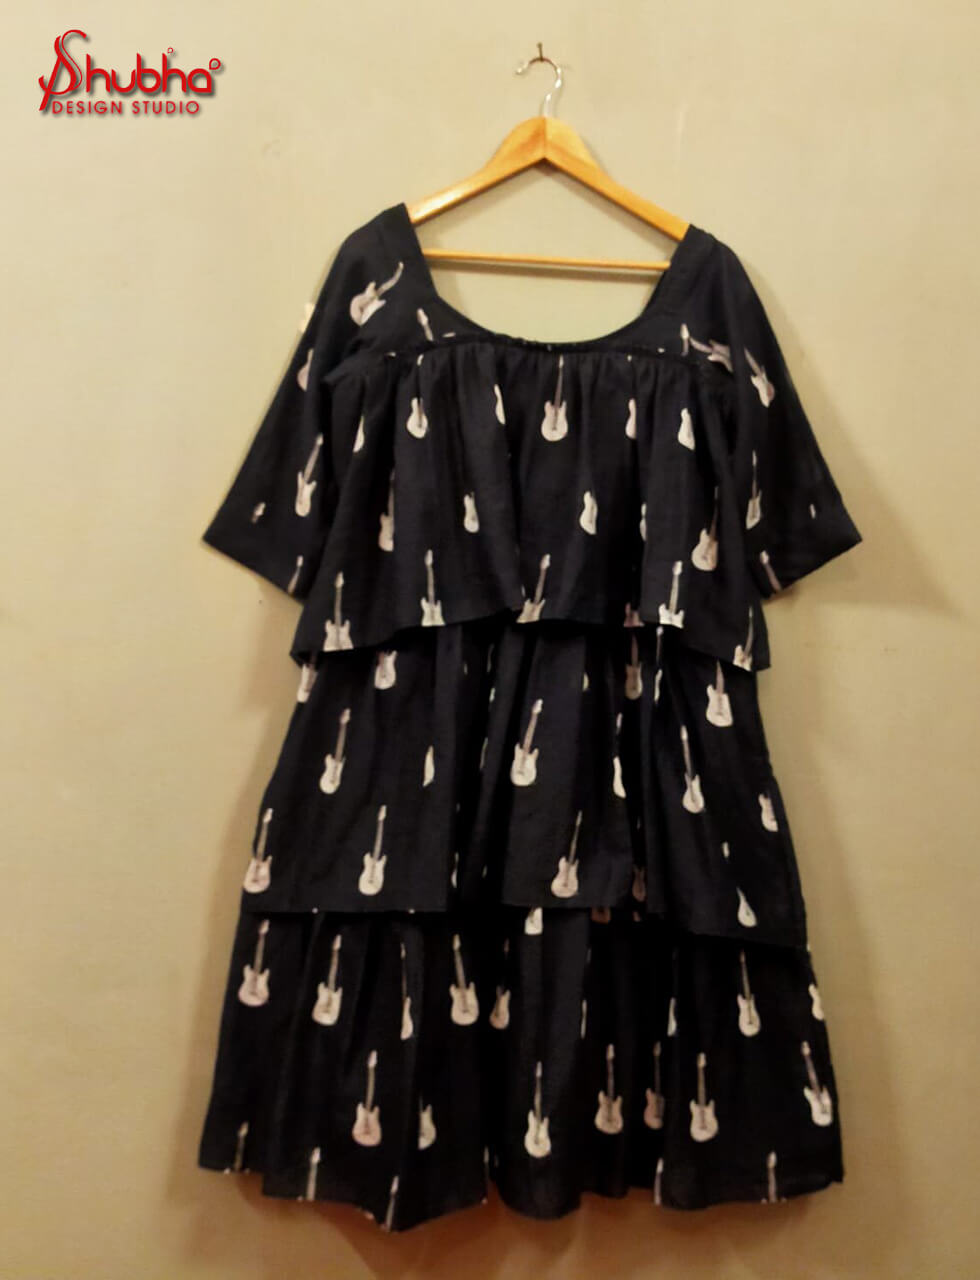 Guitar Printed 3 Tiered Frill Dress